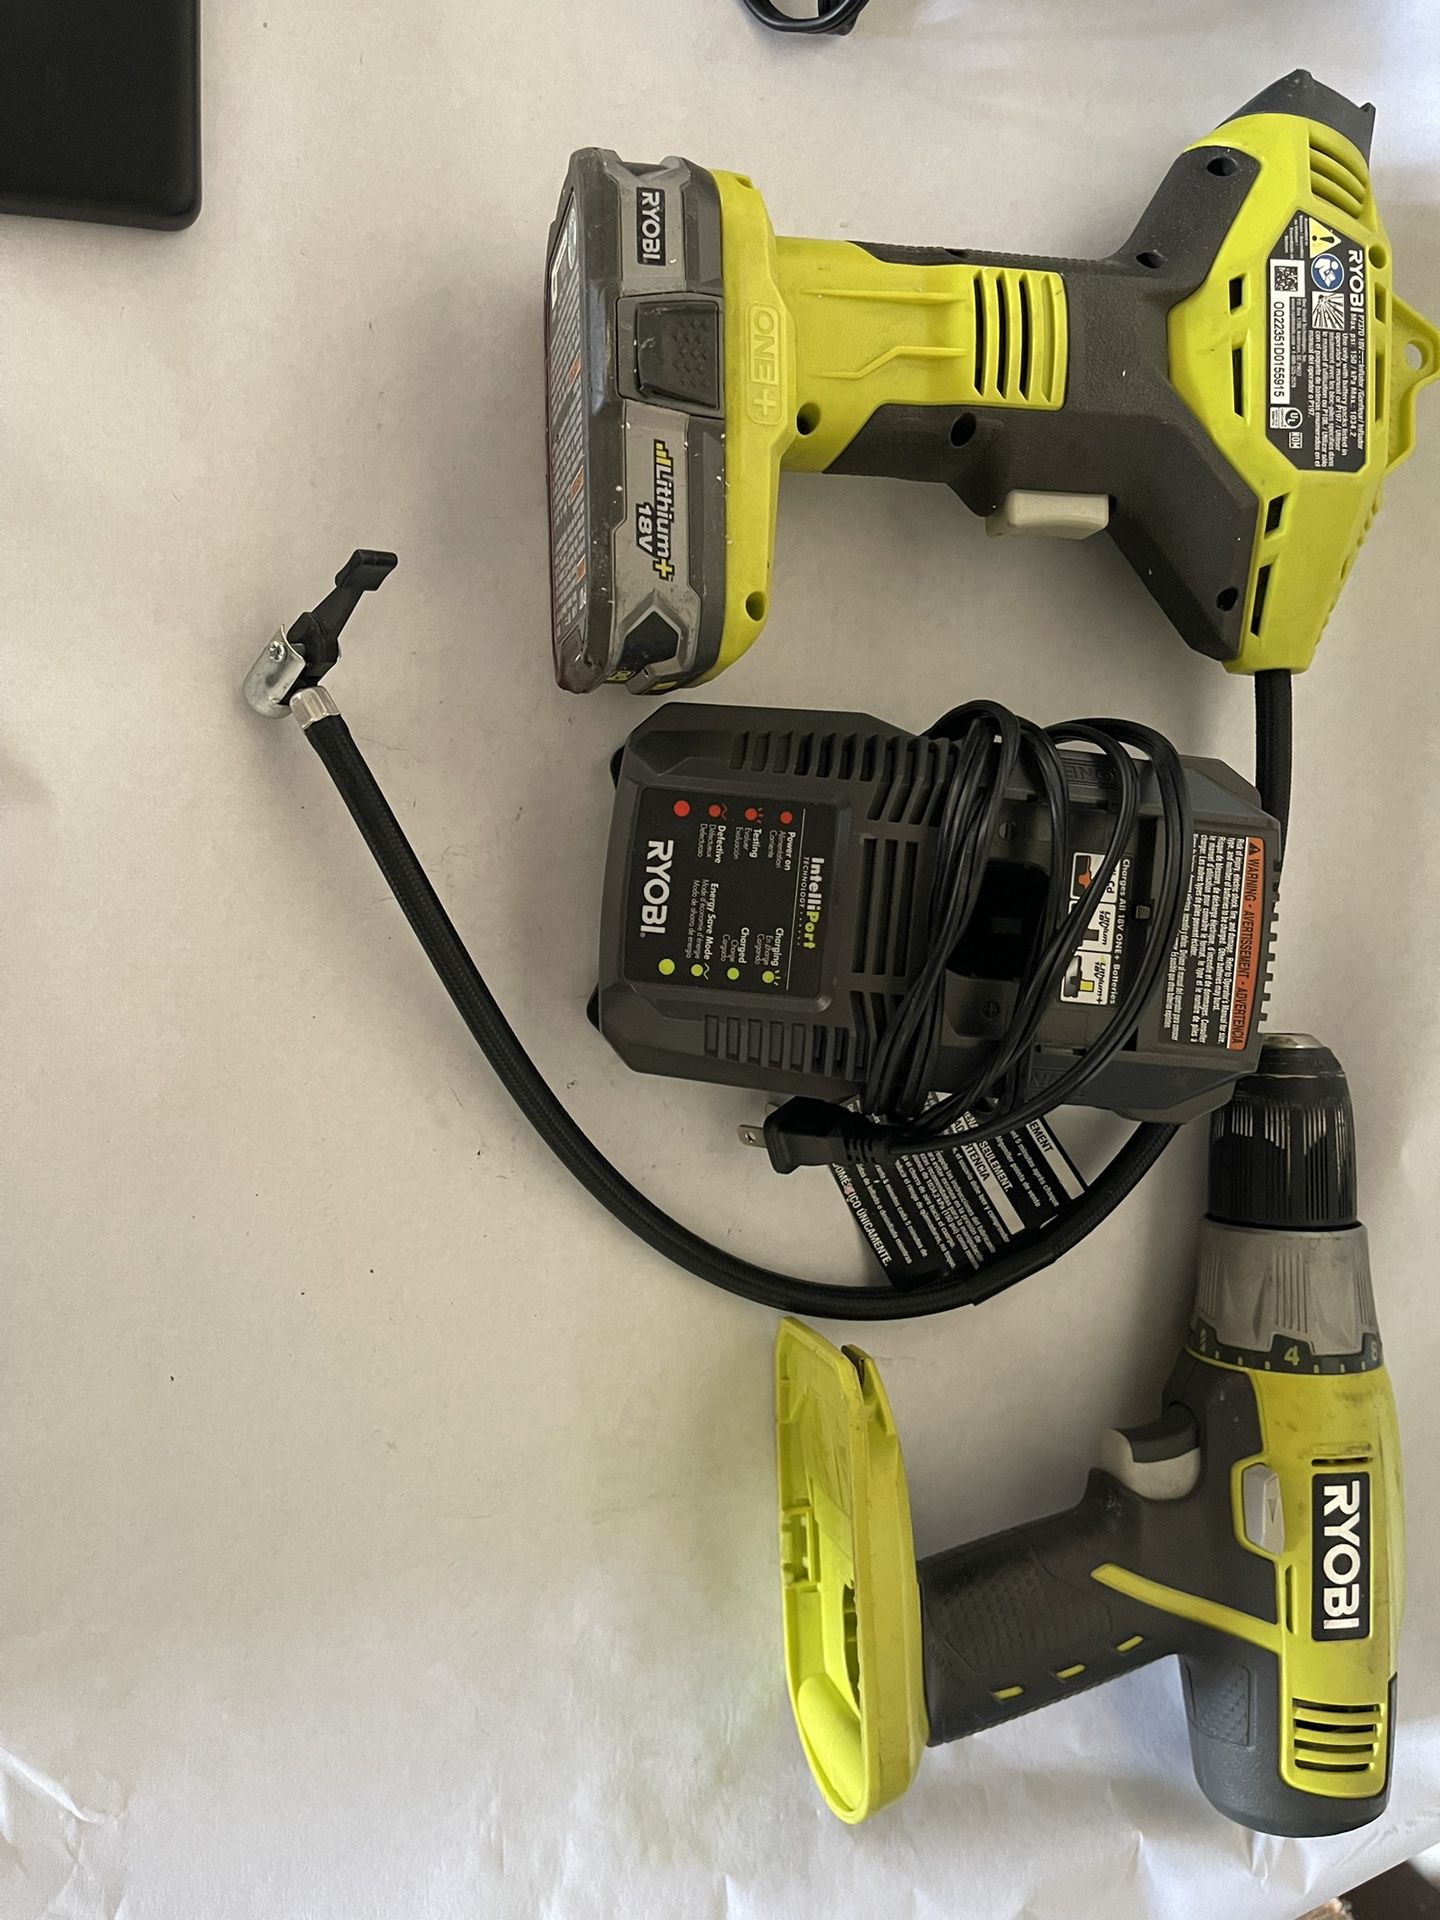 Ryobi 18v Drill And Tire Inflator With 18v Lithium Battery 